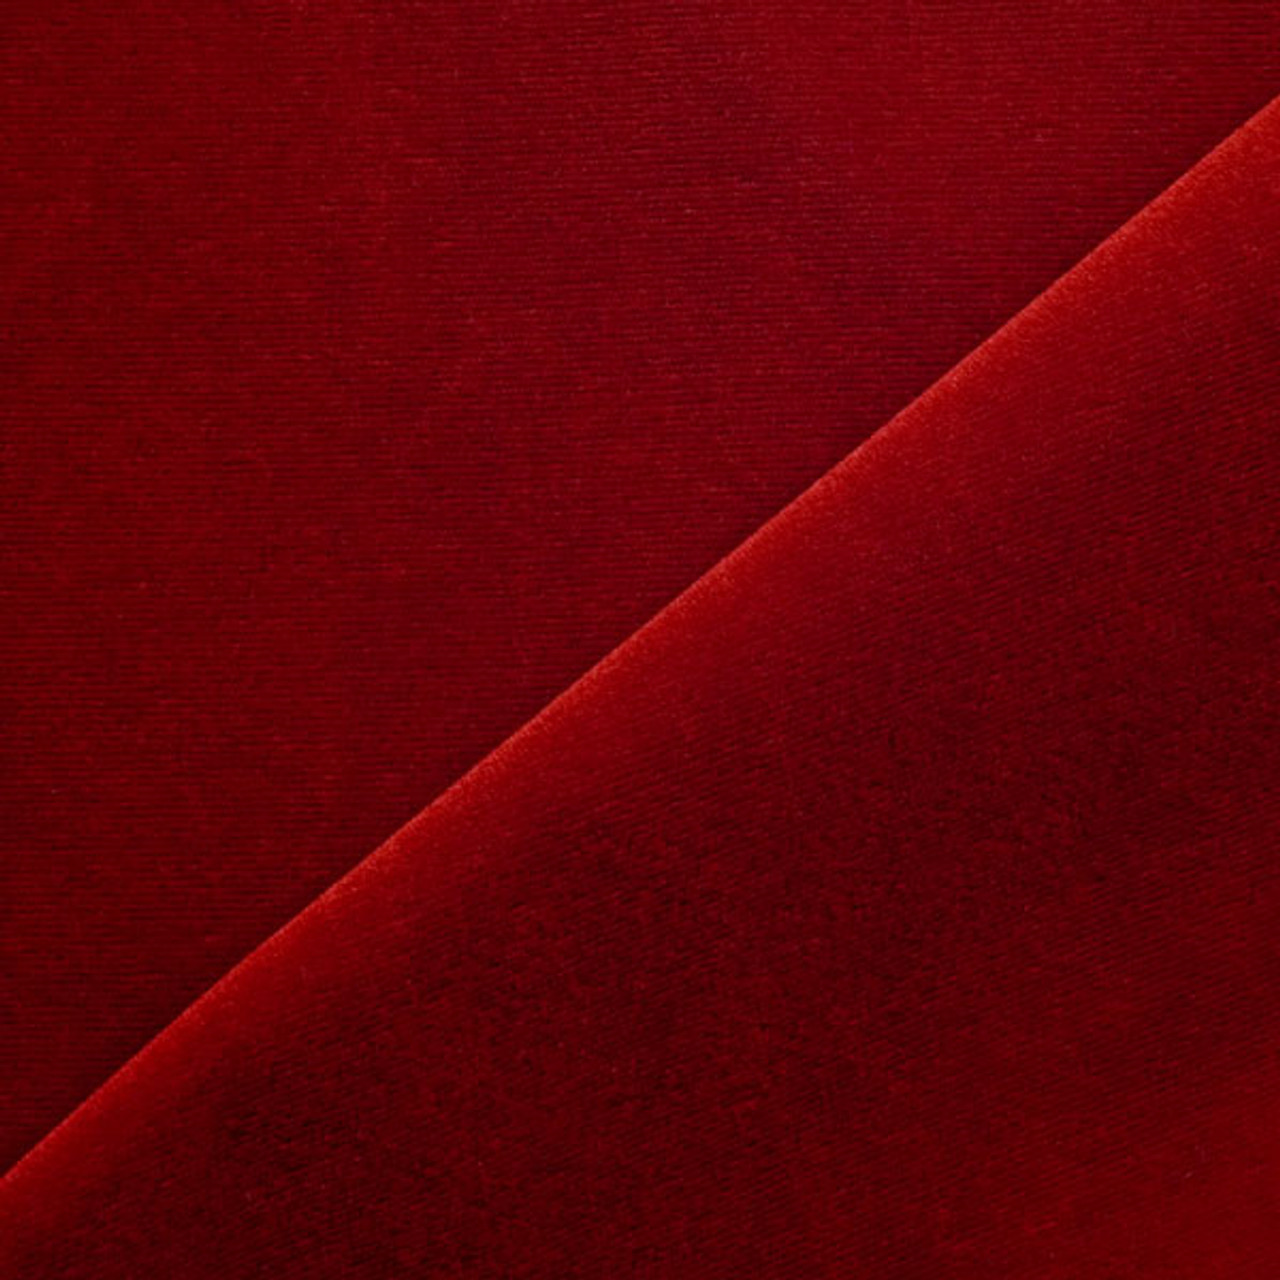 Stretch Velvet Red, Fabric by the Yard